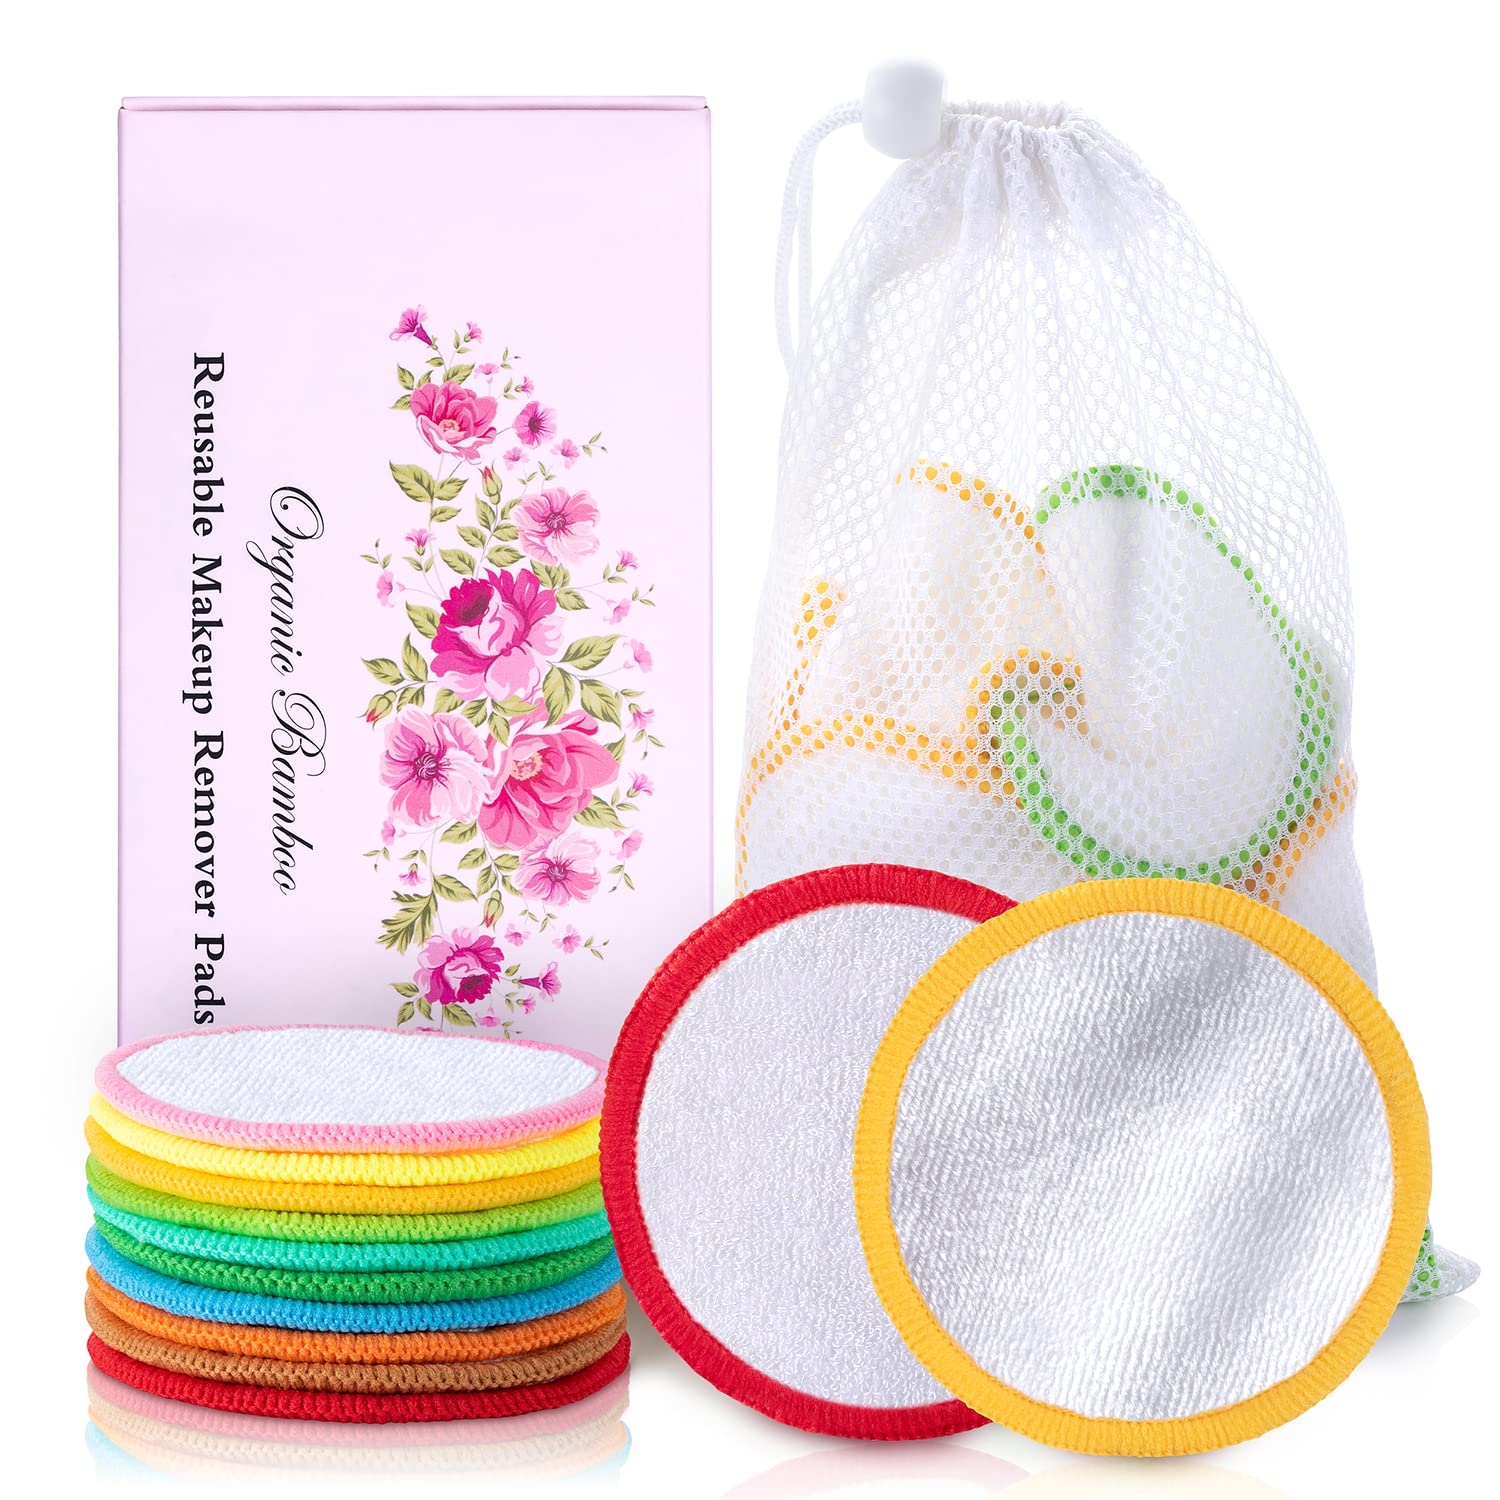 Reusable Cotton Rounds (with Laundry Bag)